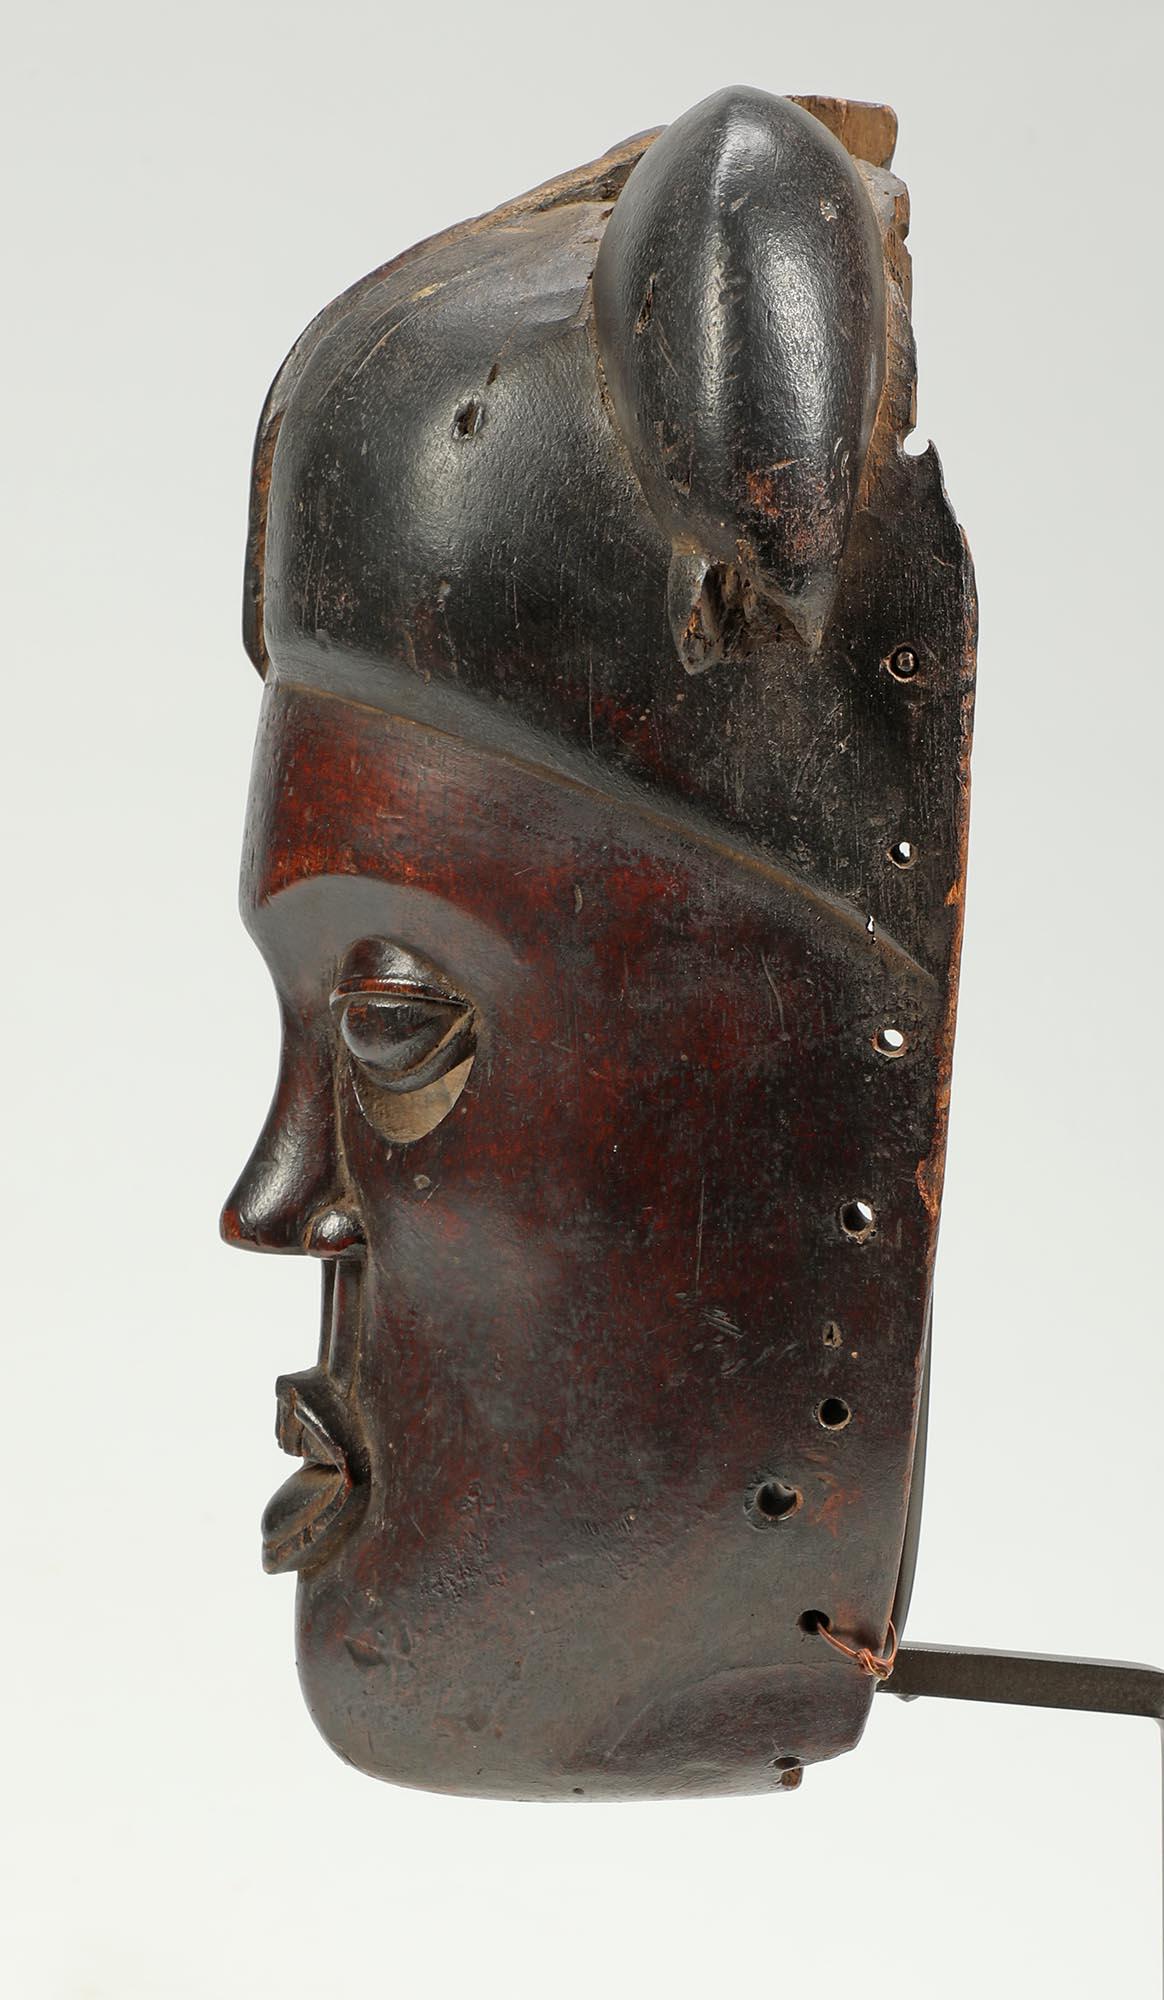 Early Ibibio Mask Fragment, Dark Red Face, Expressive Eyes, Early 20th C Africa In Distressed Condition For Sale In Point Richmond, CA